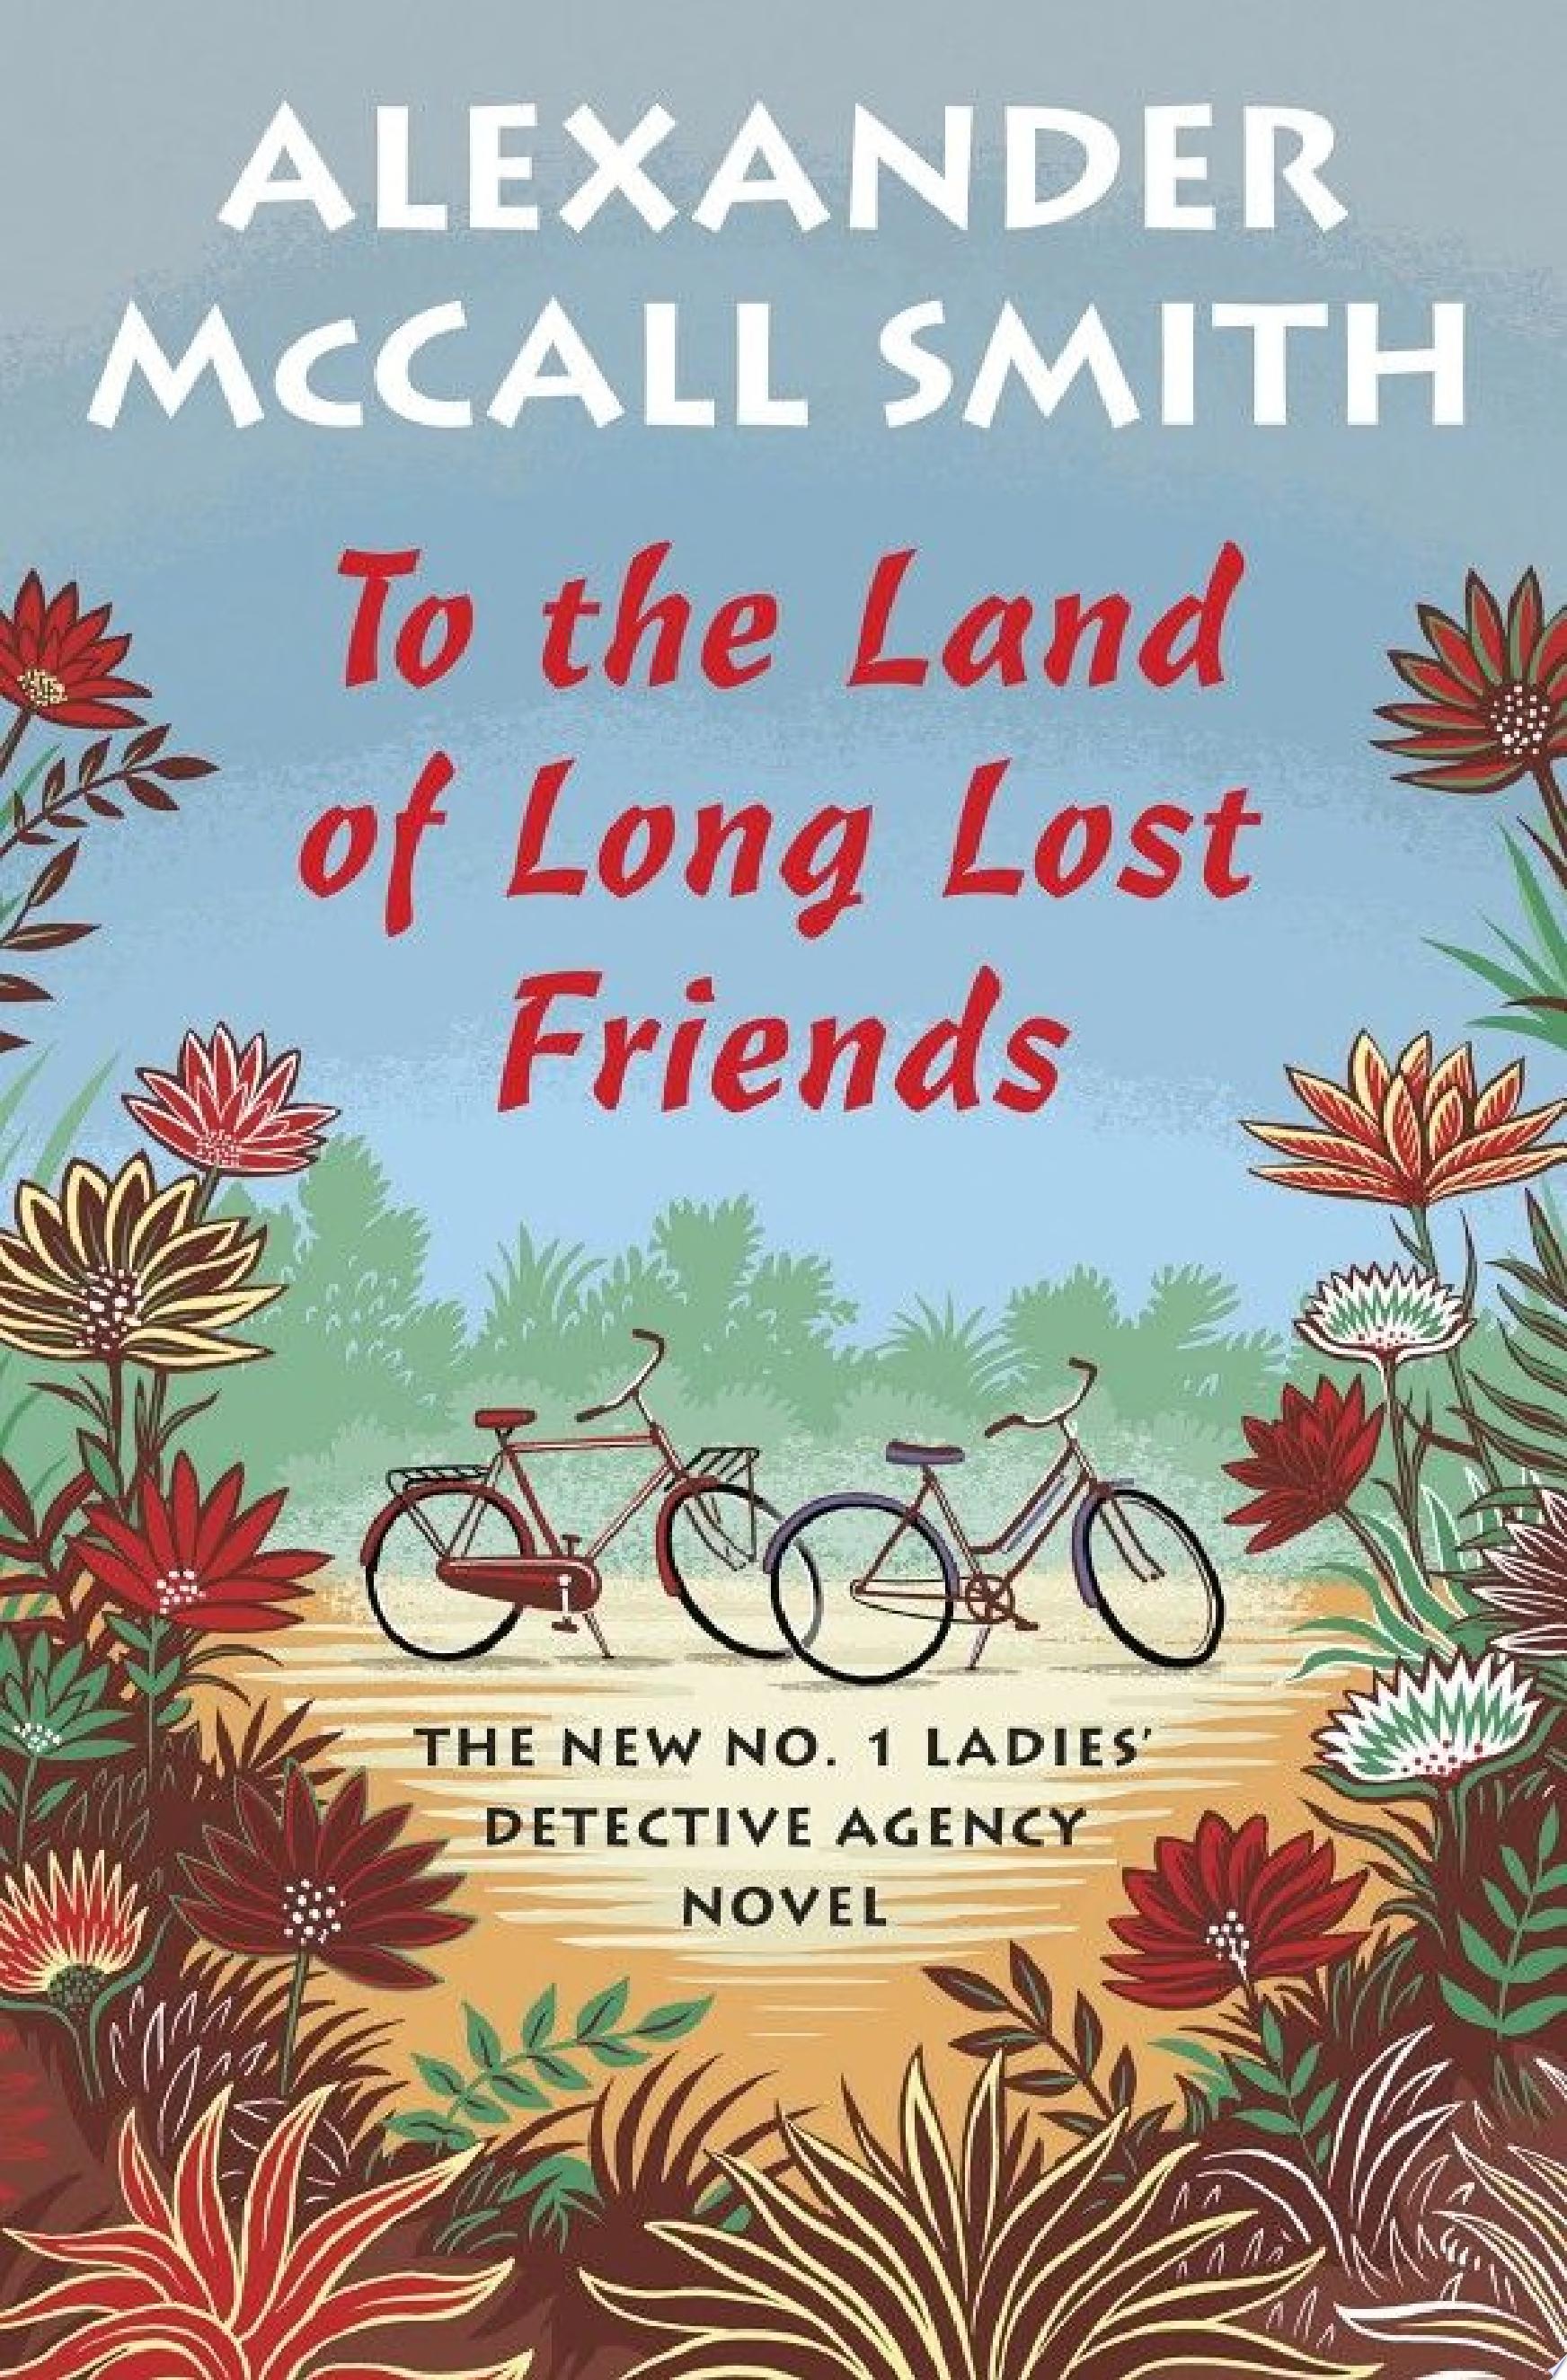 Image for "To the Land of Long Lost Friends"